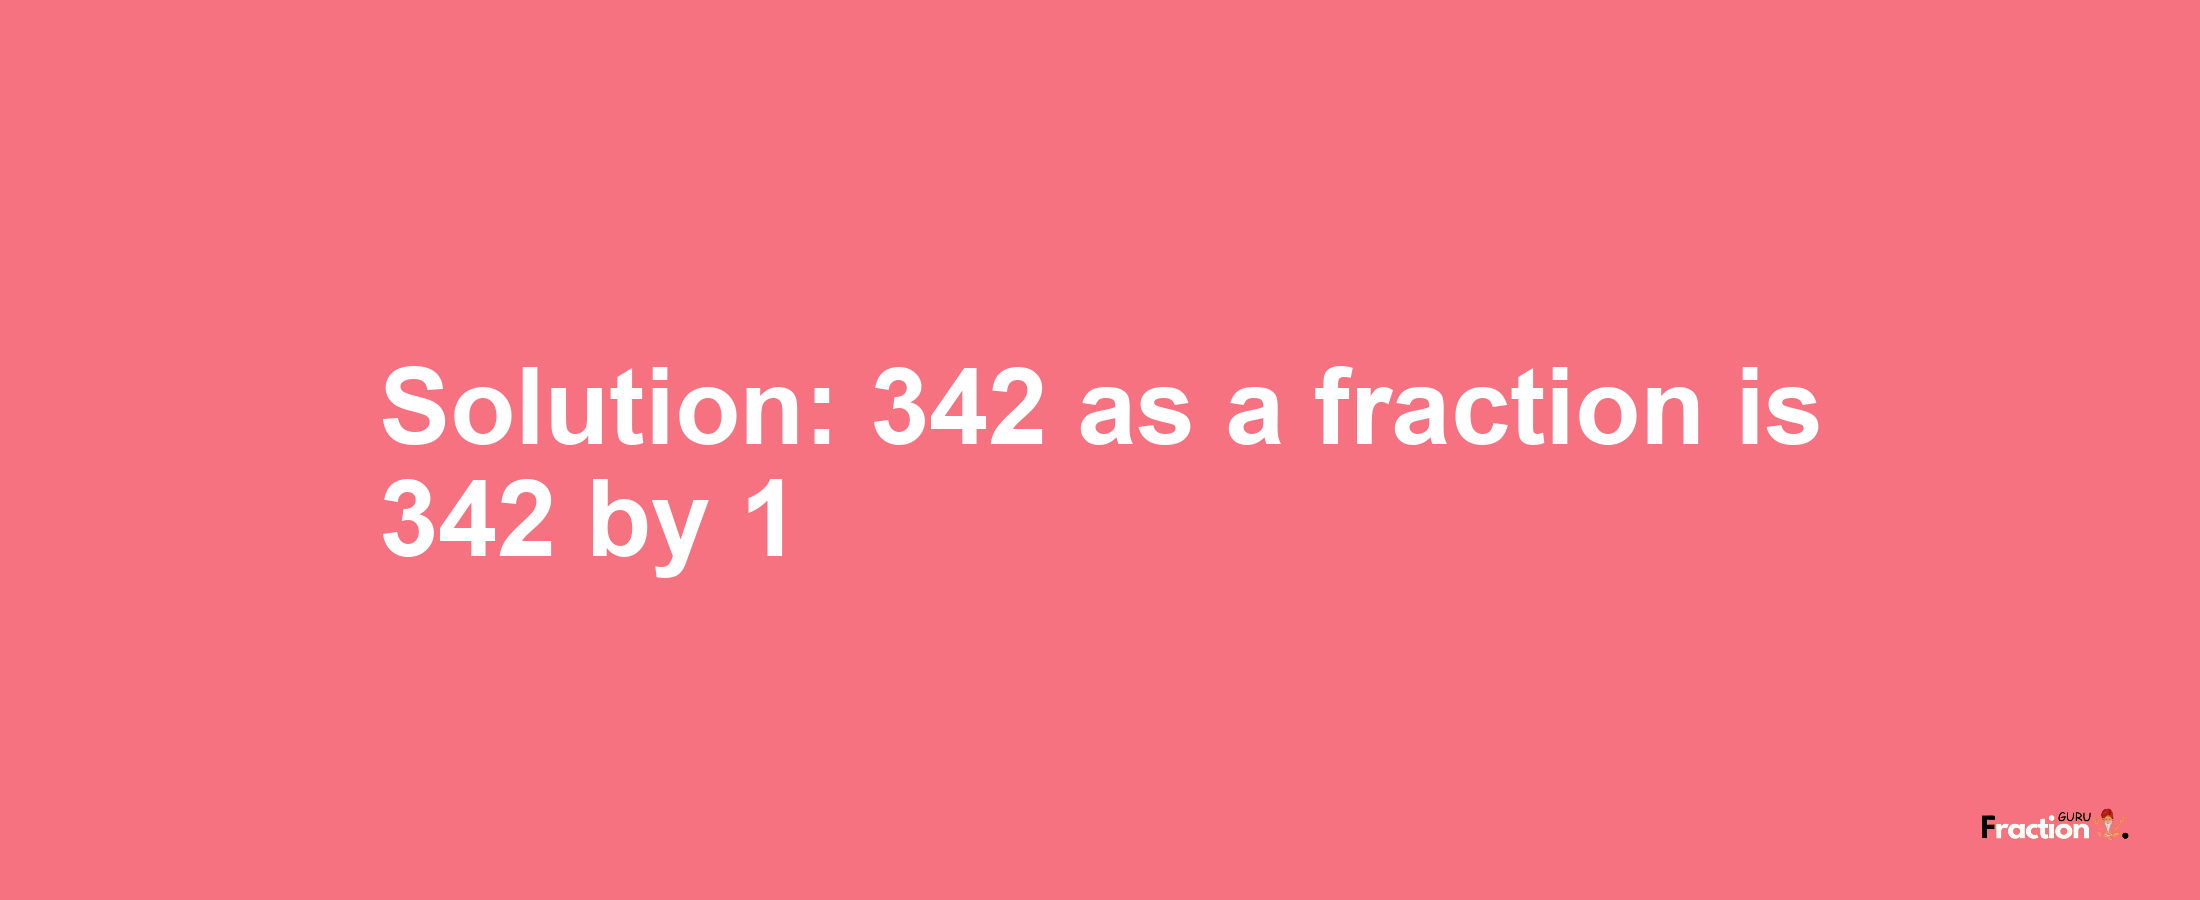 Solution:342 as a fraction is 342/1